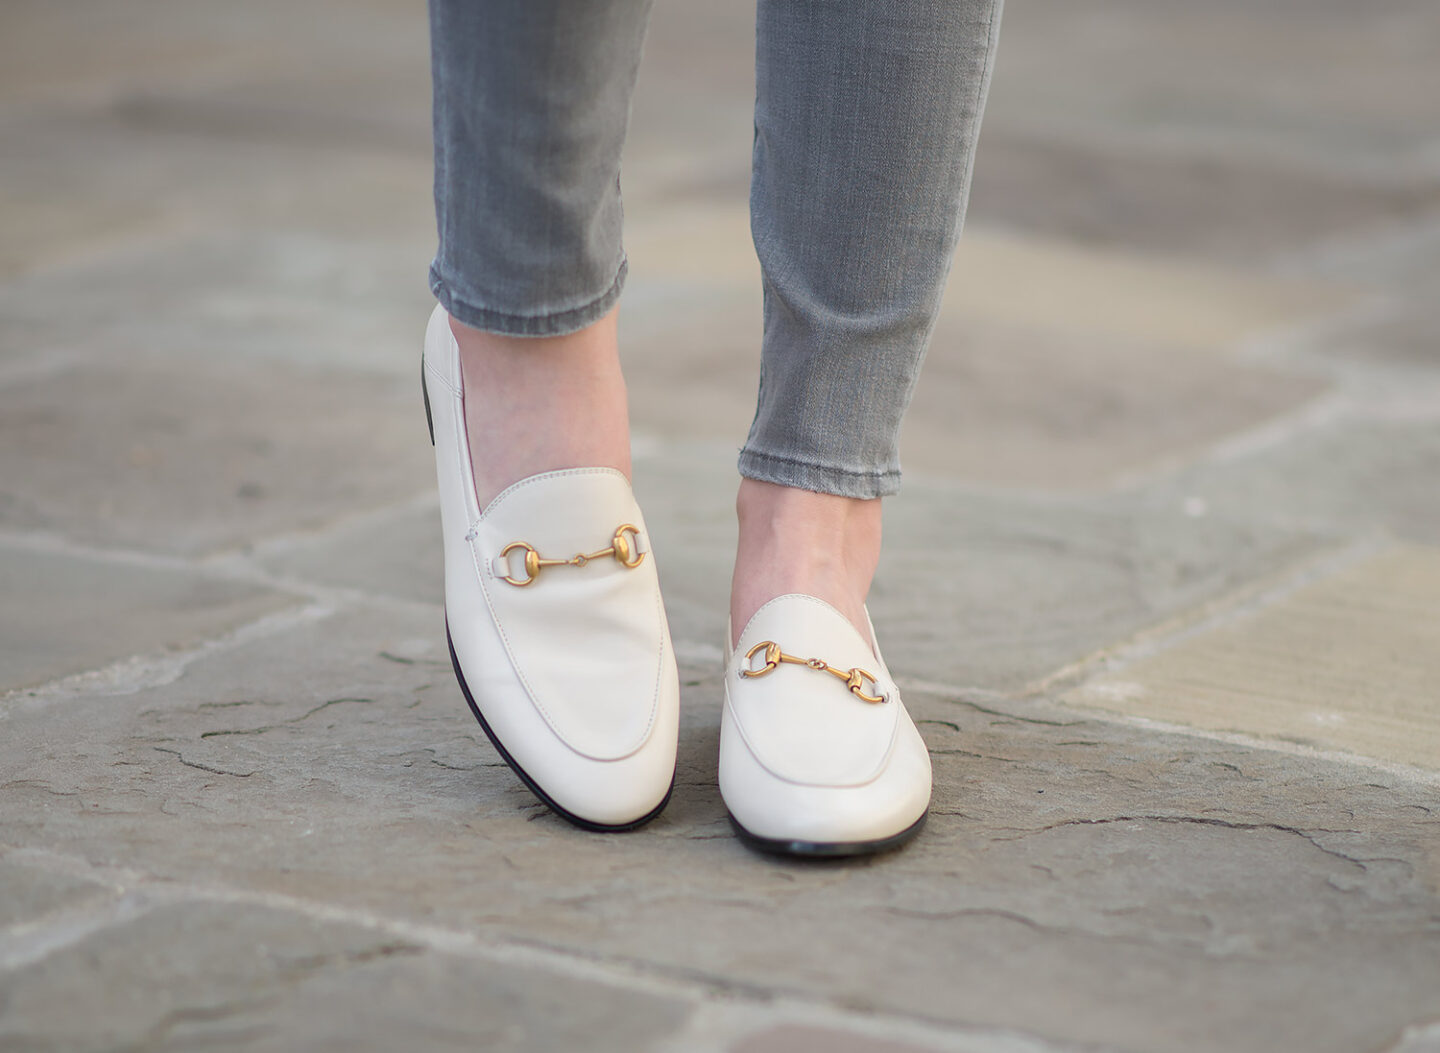 Gucci Brixton Loafers Review - FORD LA FEMME